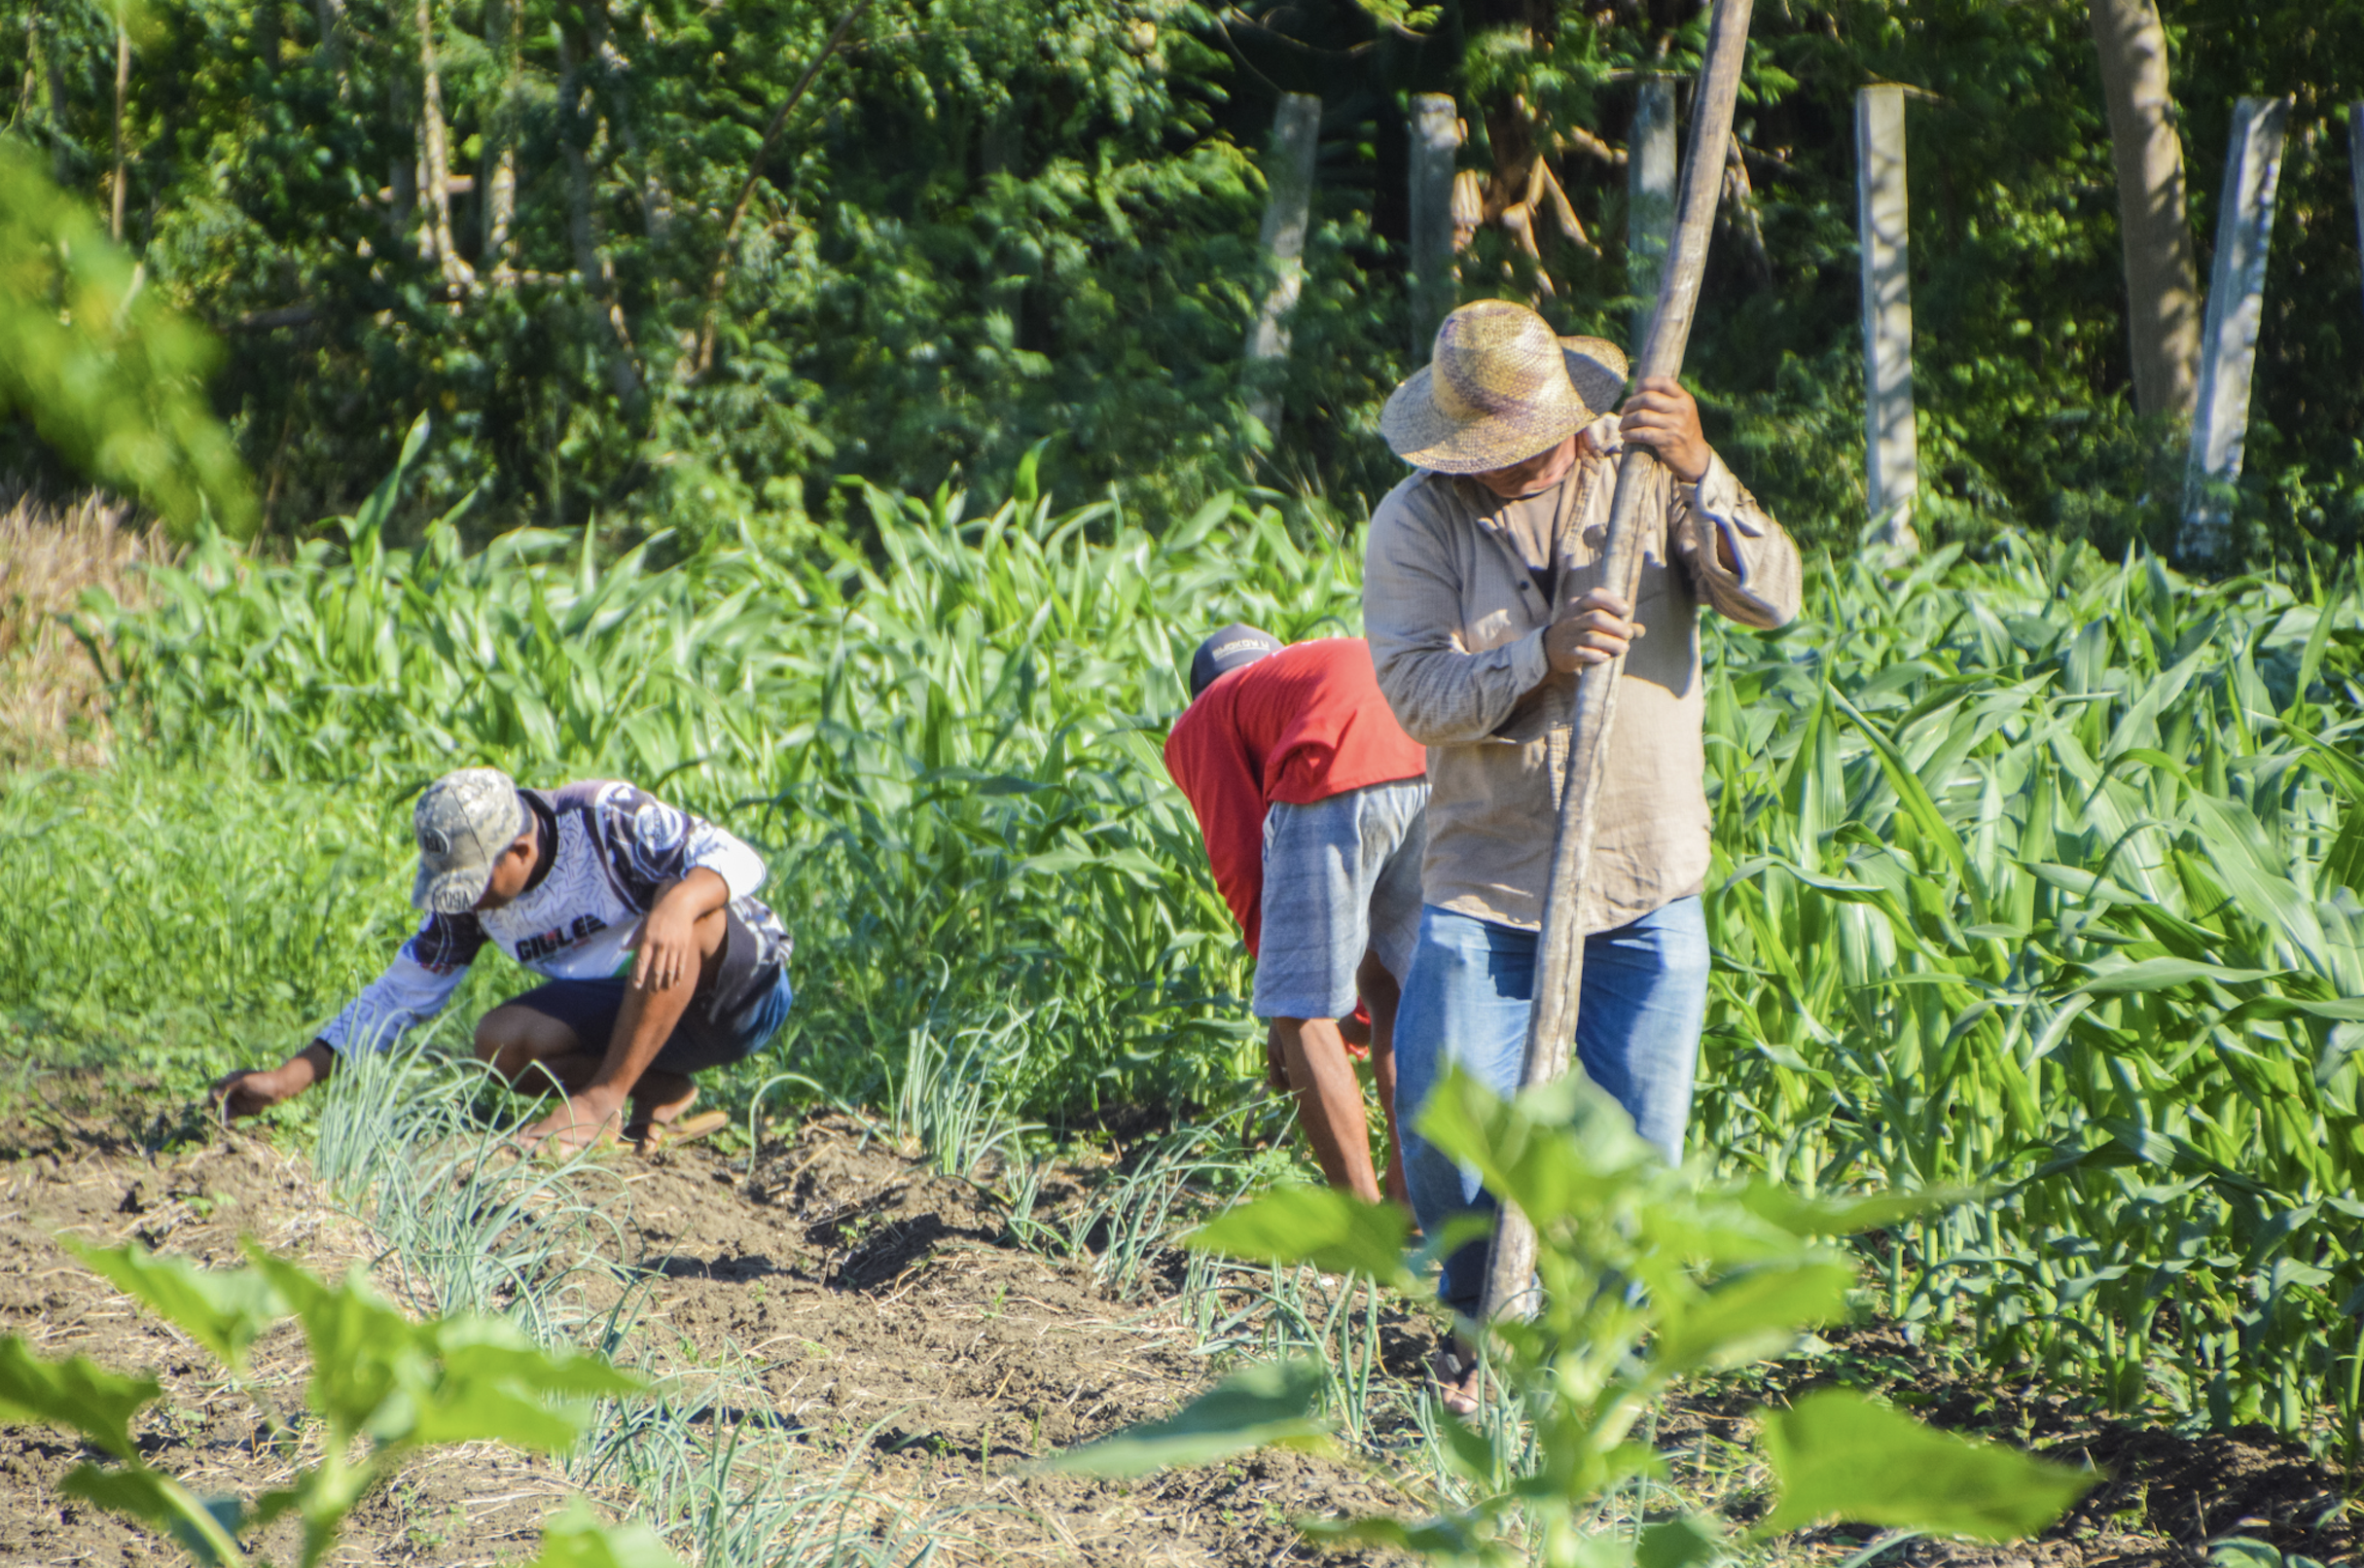 Farmers cultivating garlic at the field trials in MMSU. (Image credit: Crops Research Division, DOST-PCAARRD)